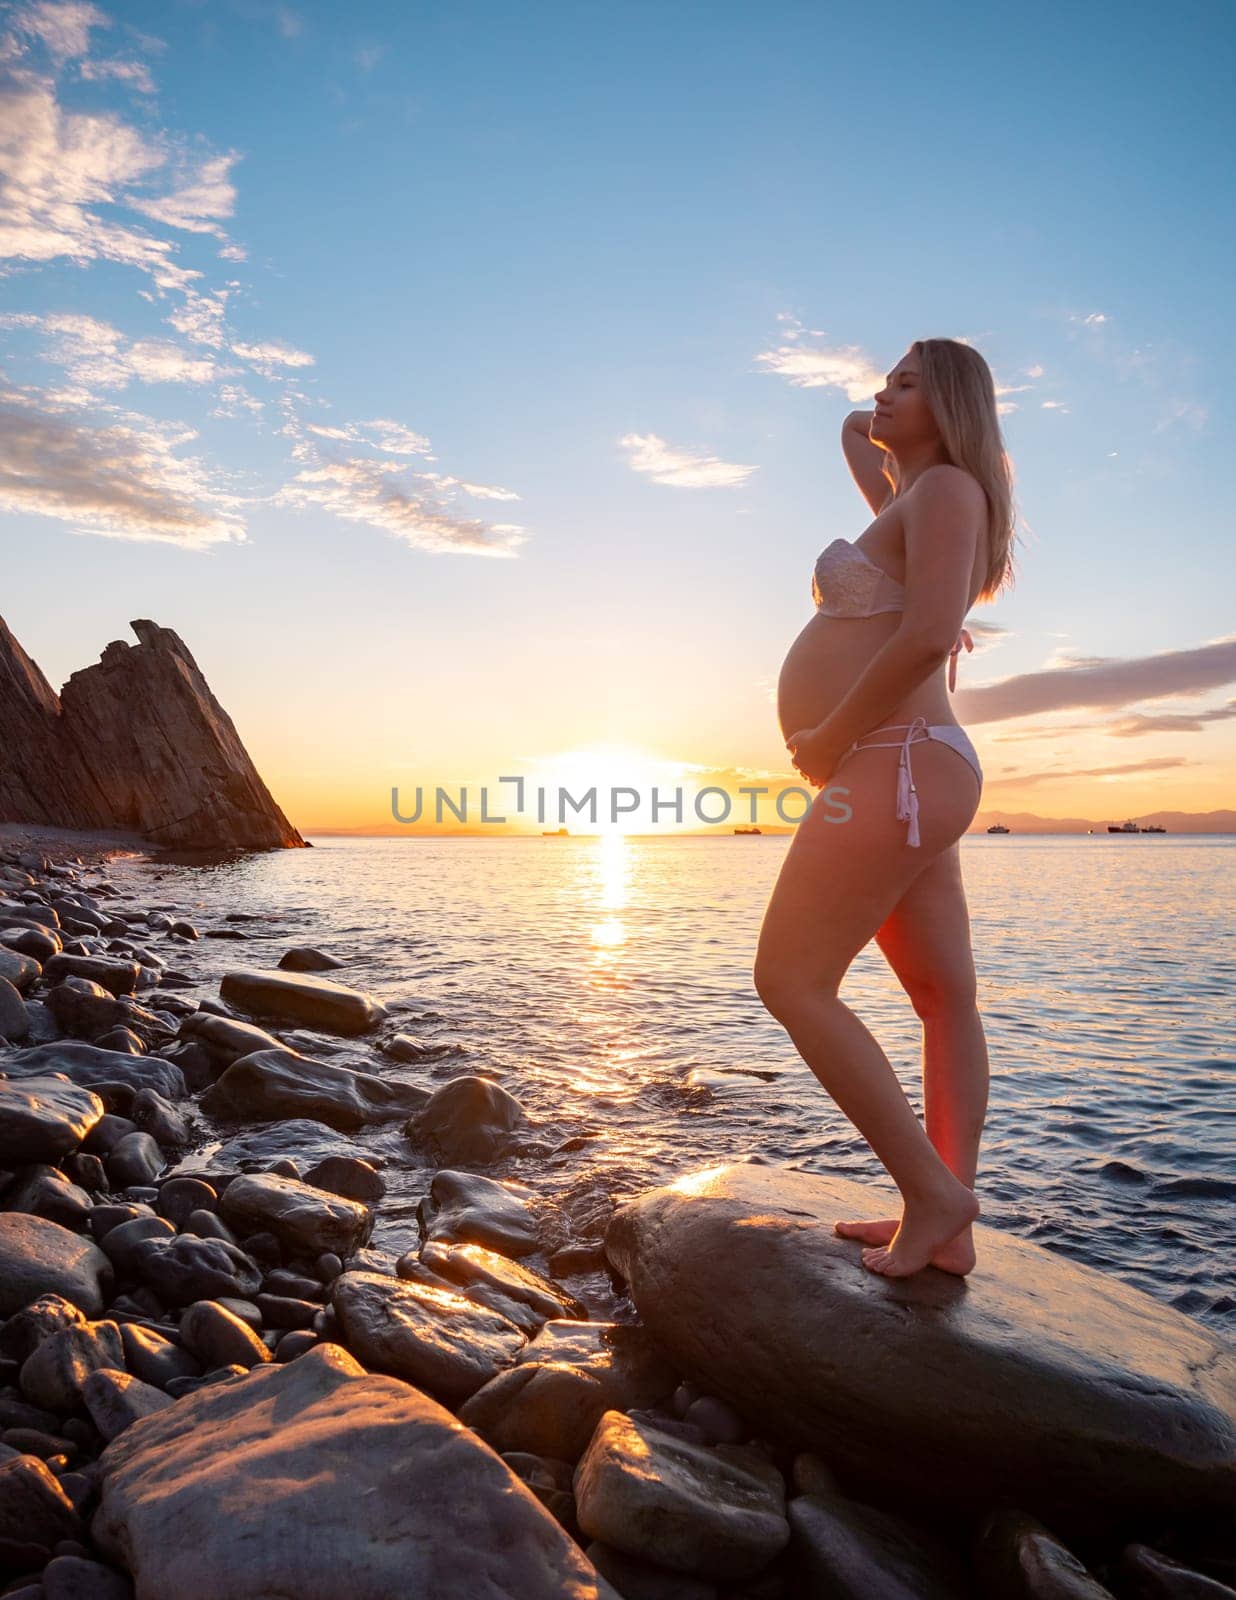 Pregnant woman in bikini posing on rocky beach at sunrise with mountain view by Busker